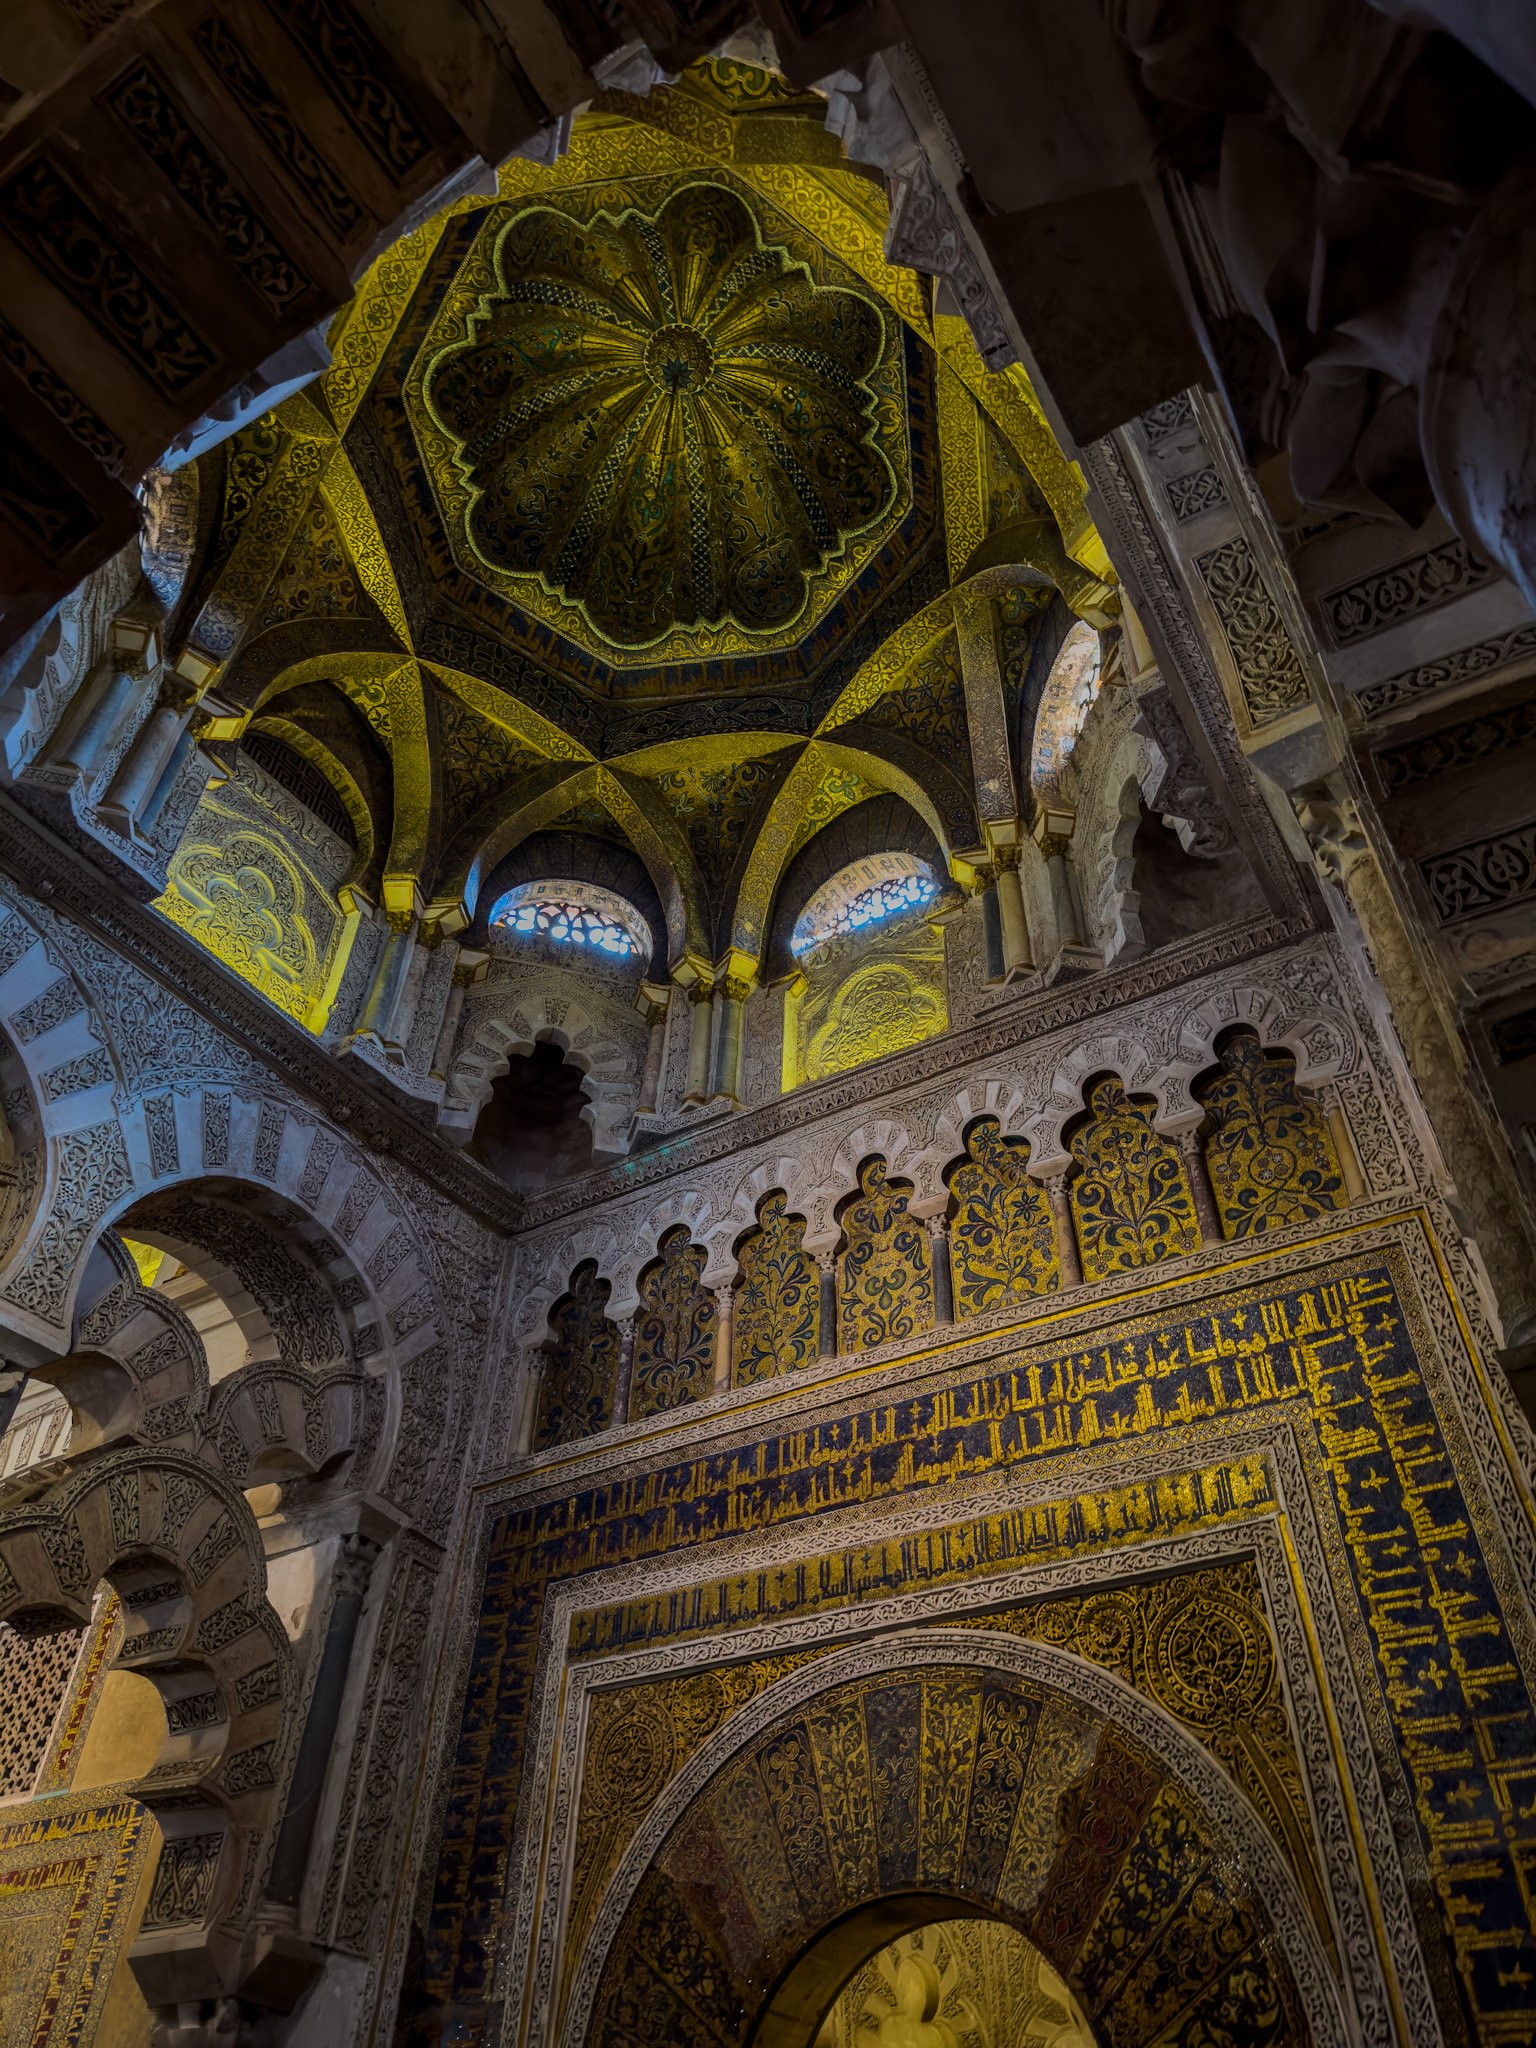 Artistic upwards photo of the interior of the Mosque of Cordoba, with dim lighting highlight the intricate sculpting and paint.